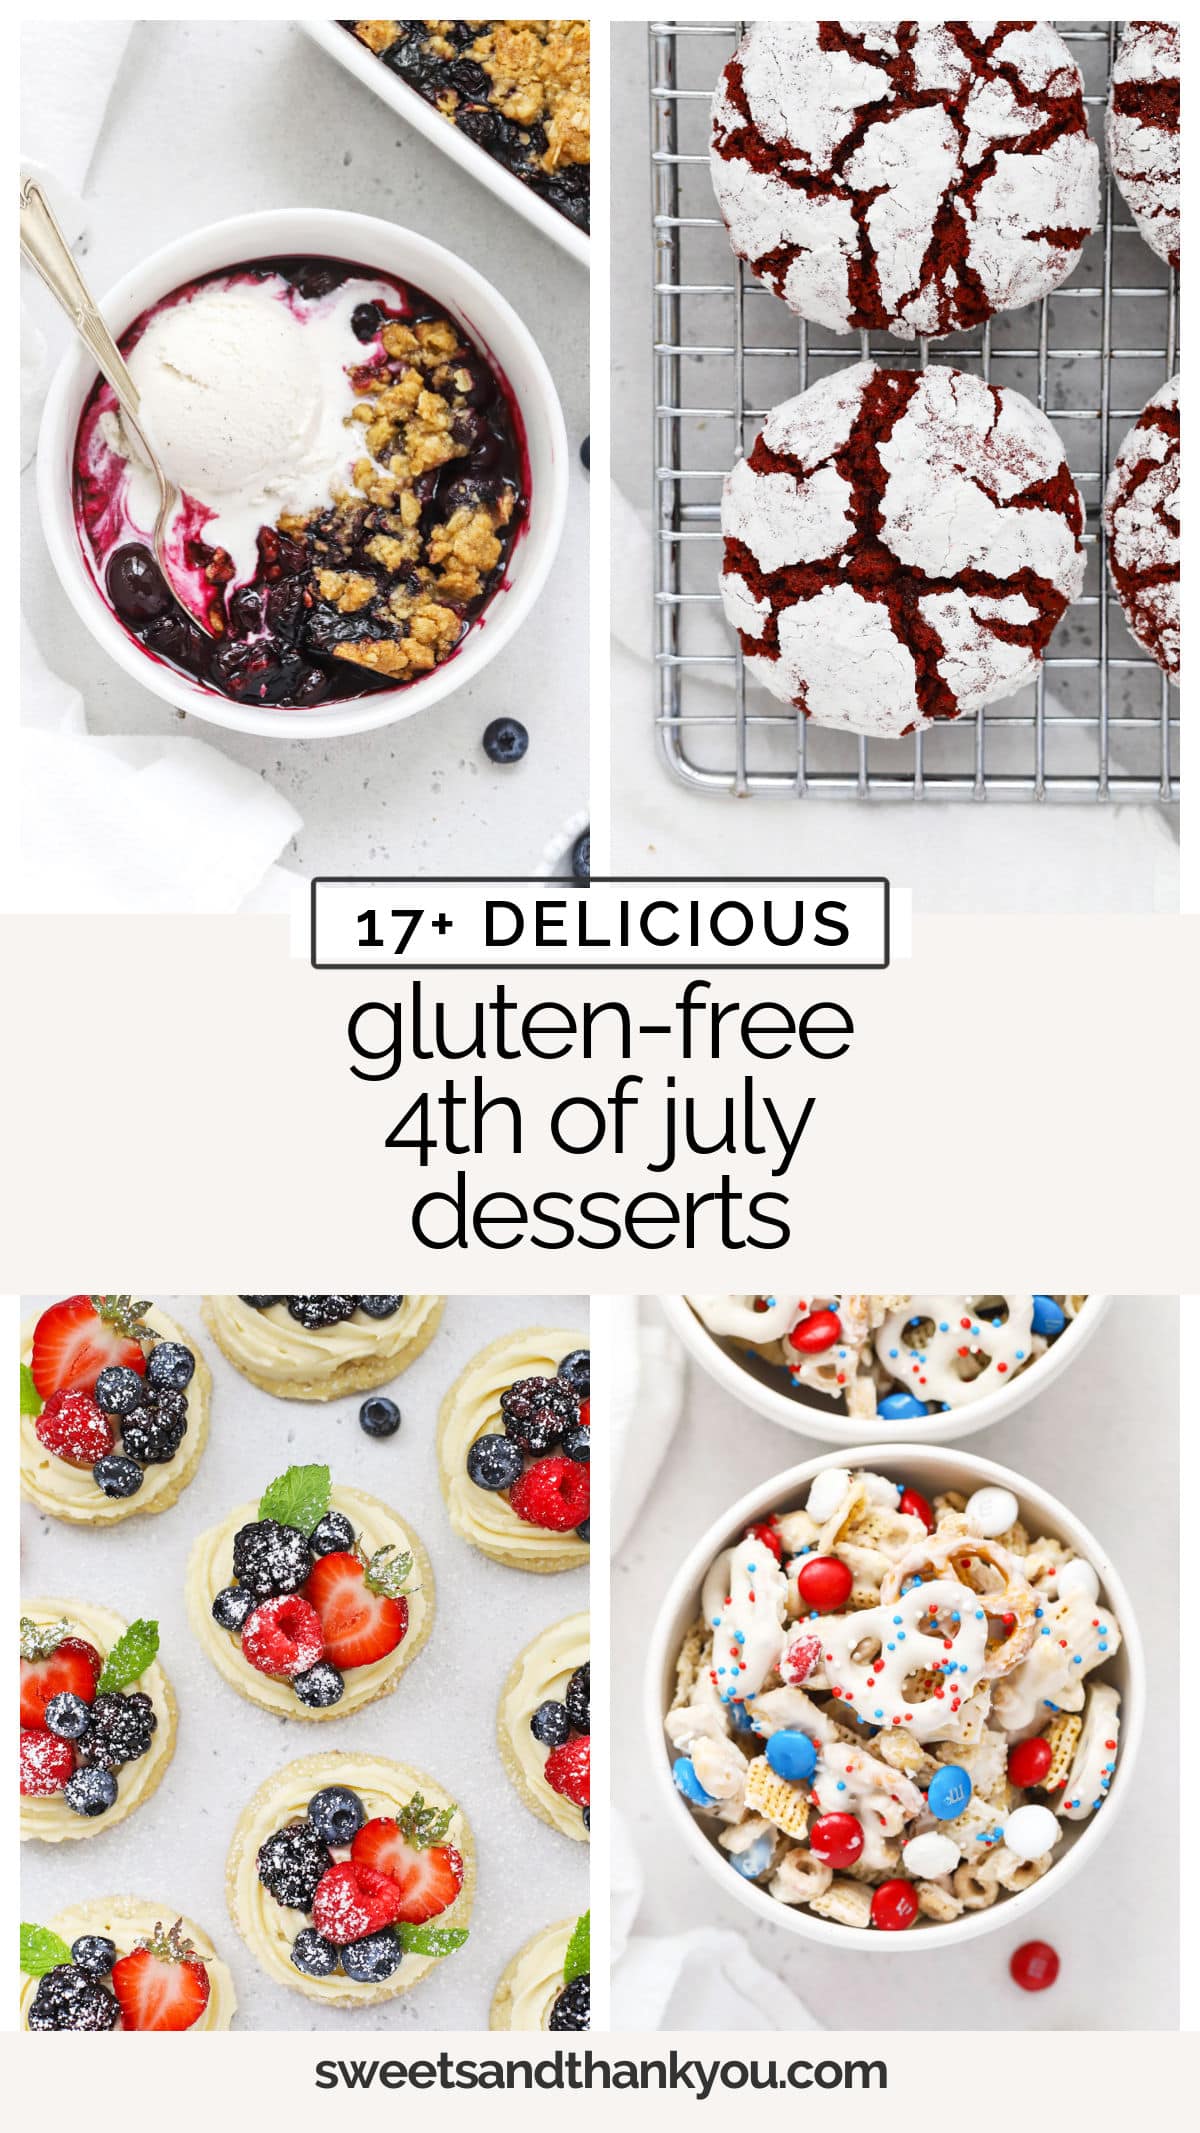 Gluten-Free 4th of July desserts to try this year! From red, white, and blue recipes to desserts for a crowd, we've got something for everyone this summer! / red white and blue gluten free desserts / gluten free desserts for 4th of july / gluten-free 4th of july dessert ideas / gluten-free 4th of july dessert recipes / gluten-free red white and blue dessert recipe / gluten-free summer desserts 